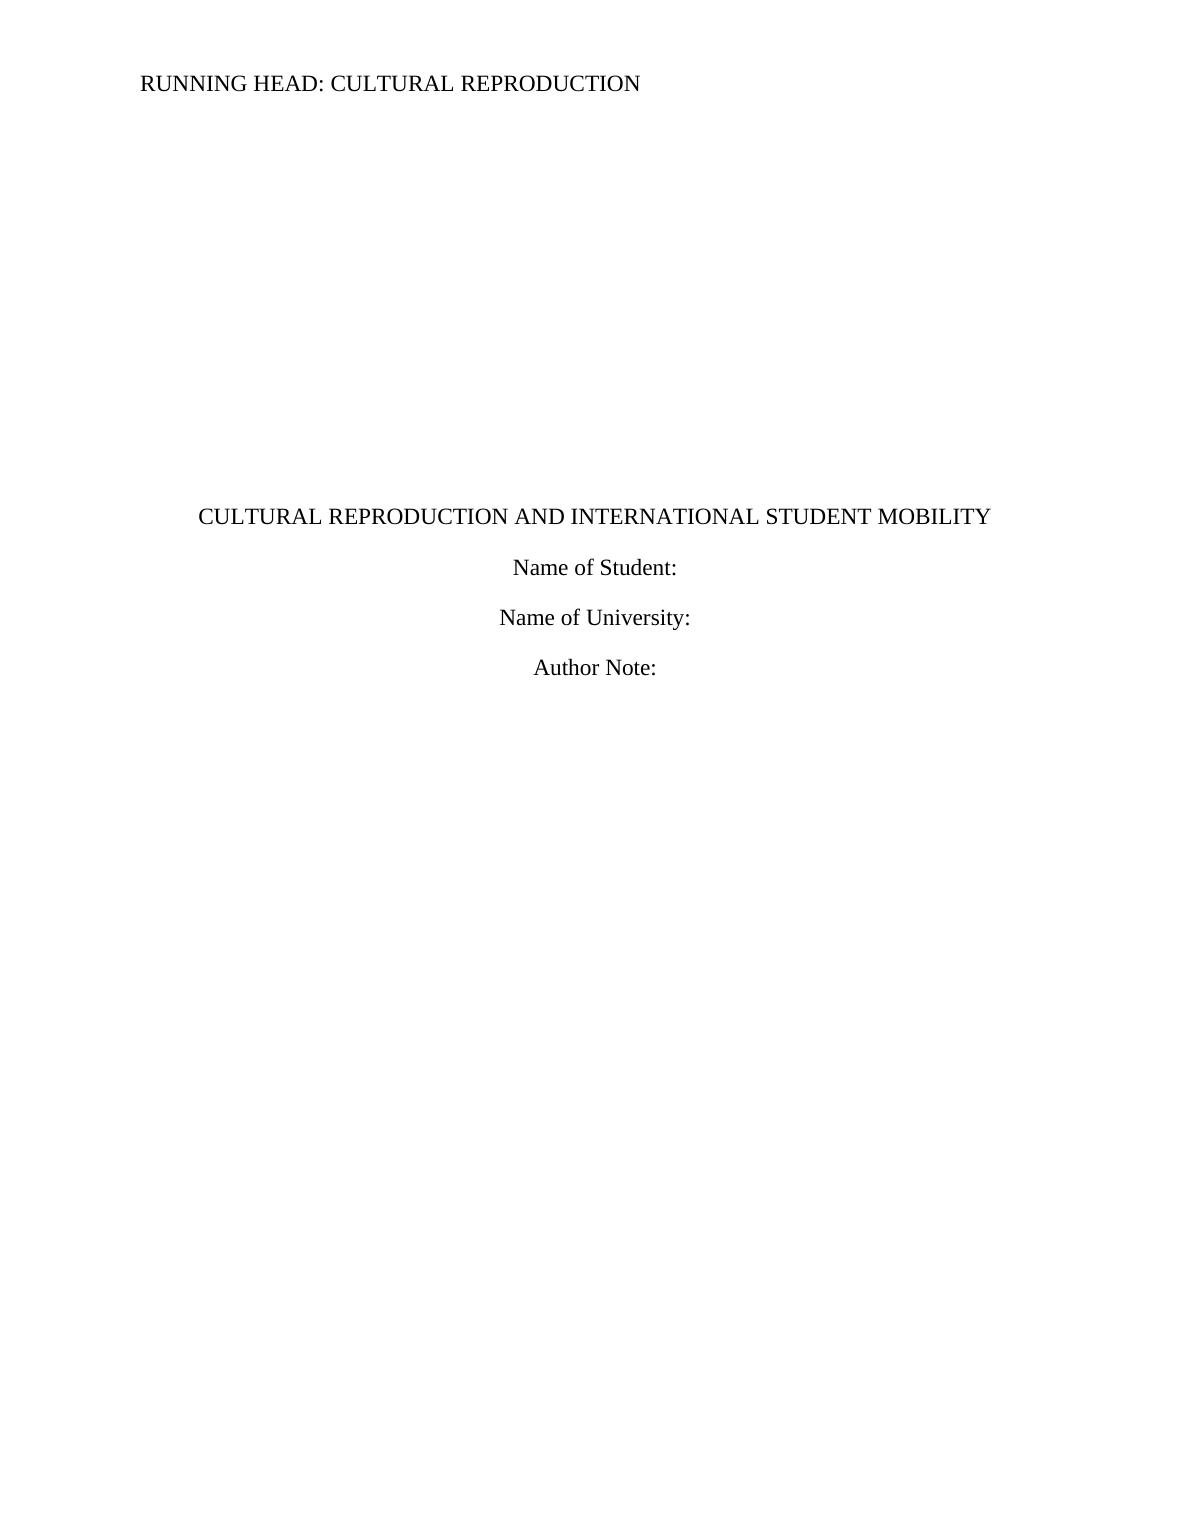 Cultural Reproduction and International Student Mobility_1